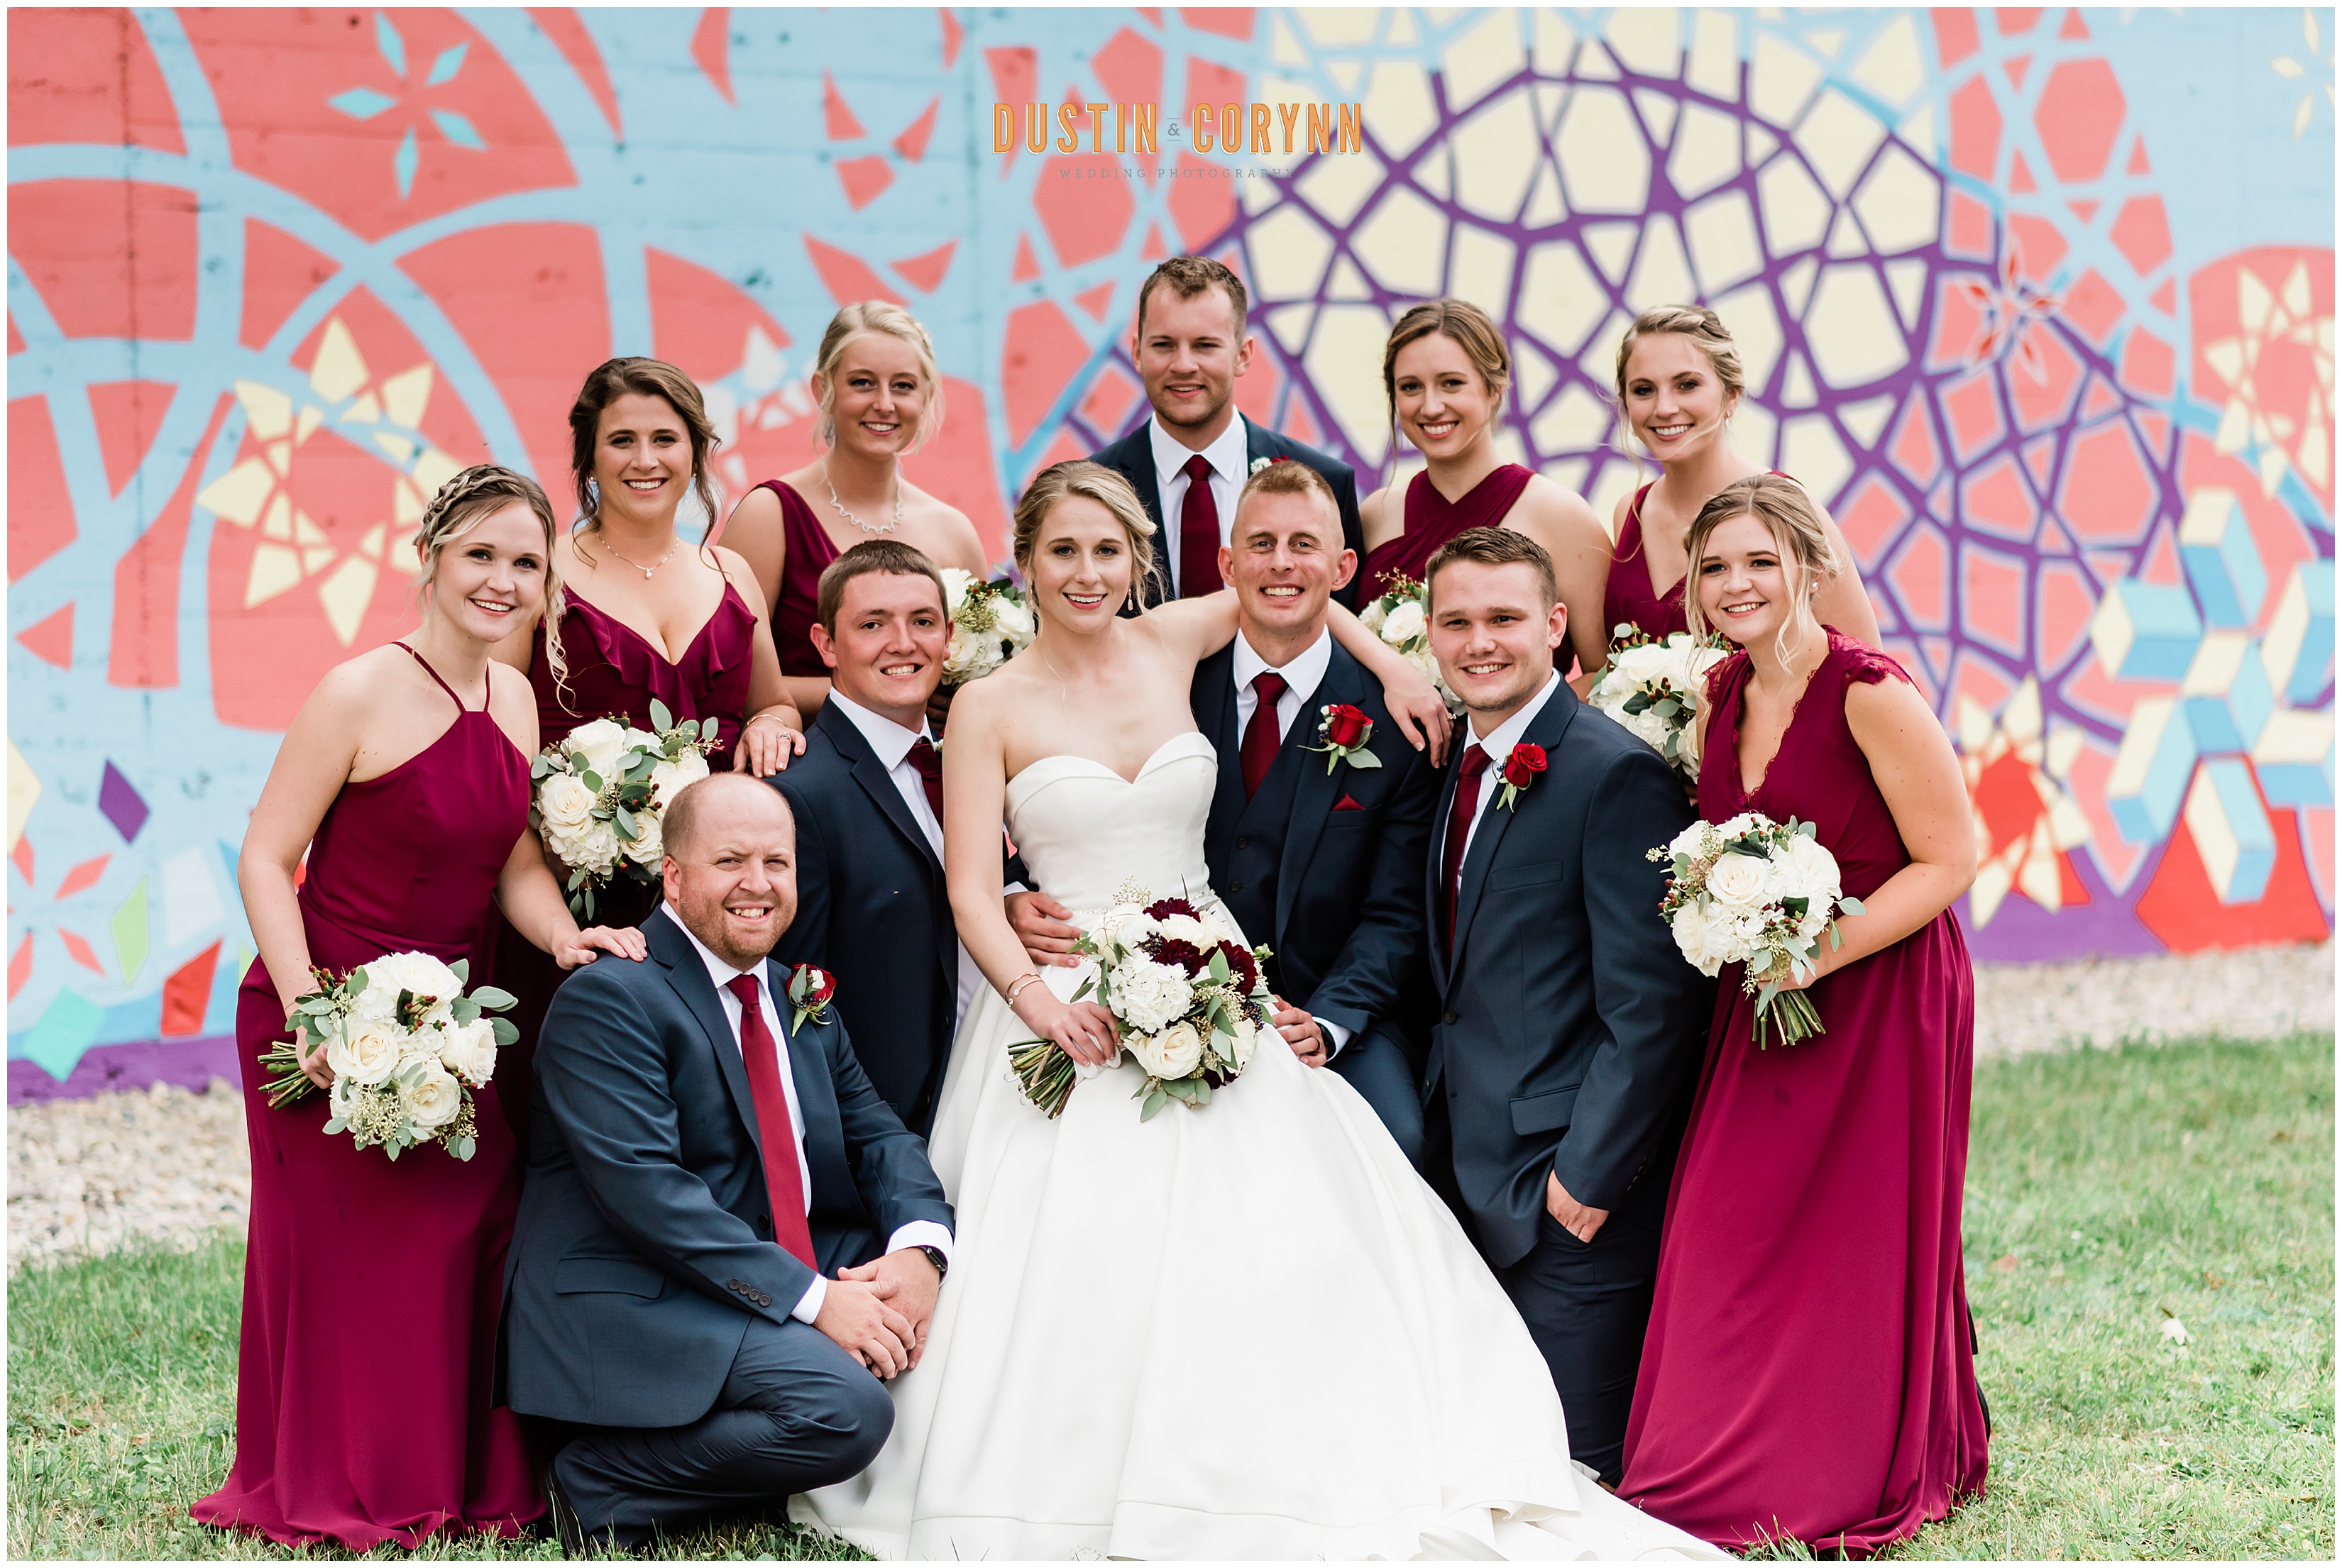 Wedding Party Portraits in Downtown Fort Wayne